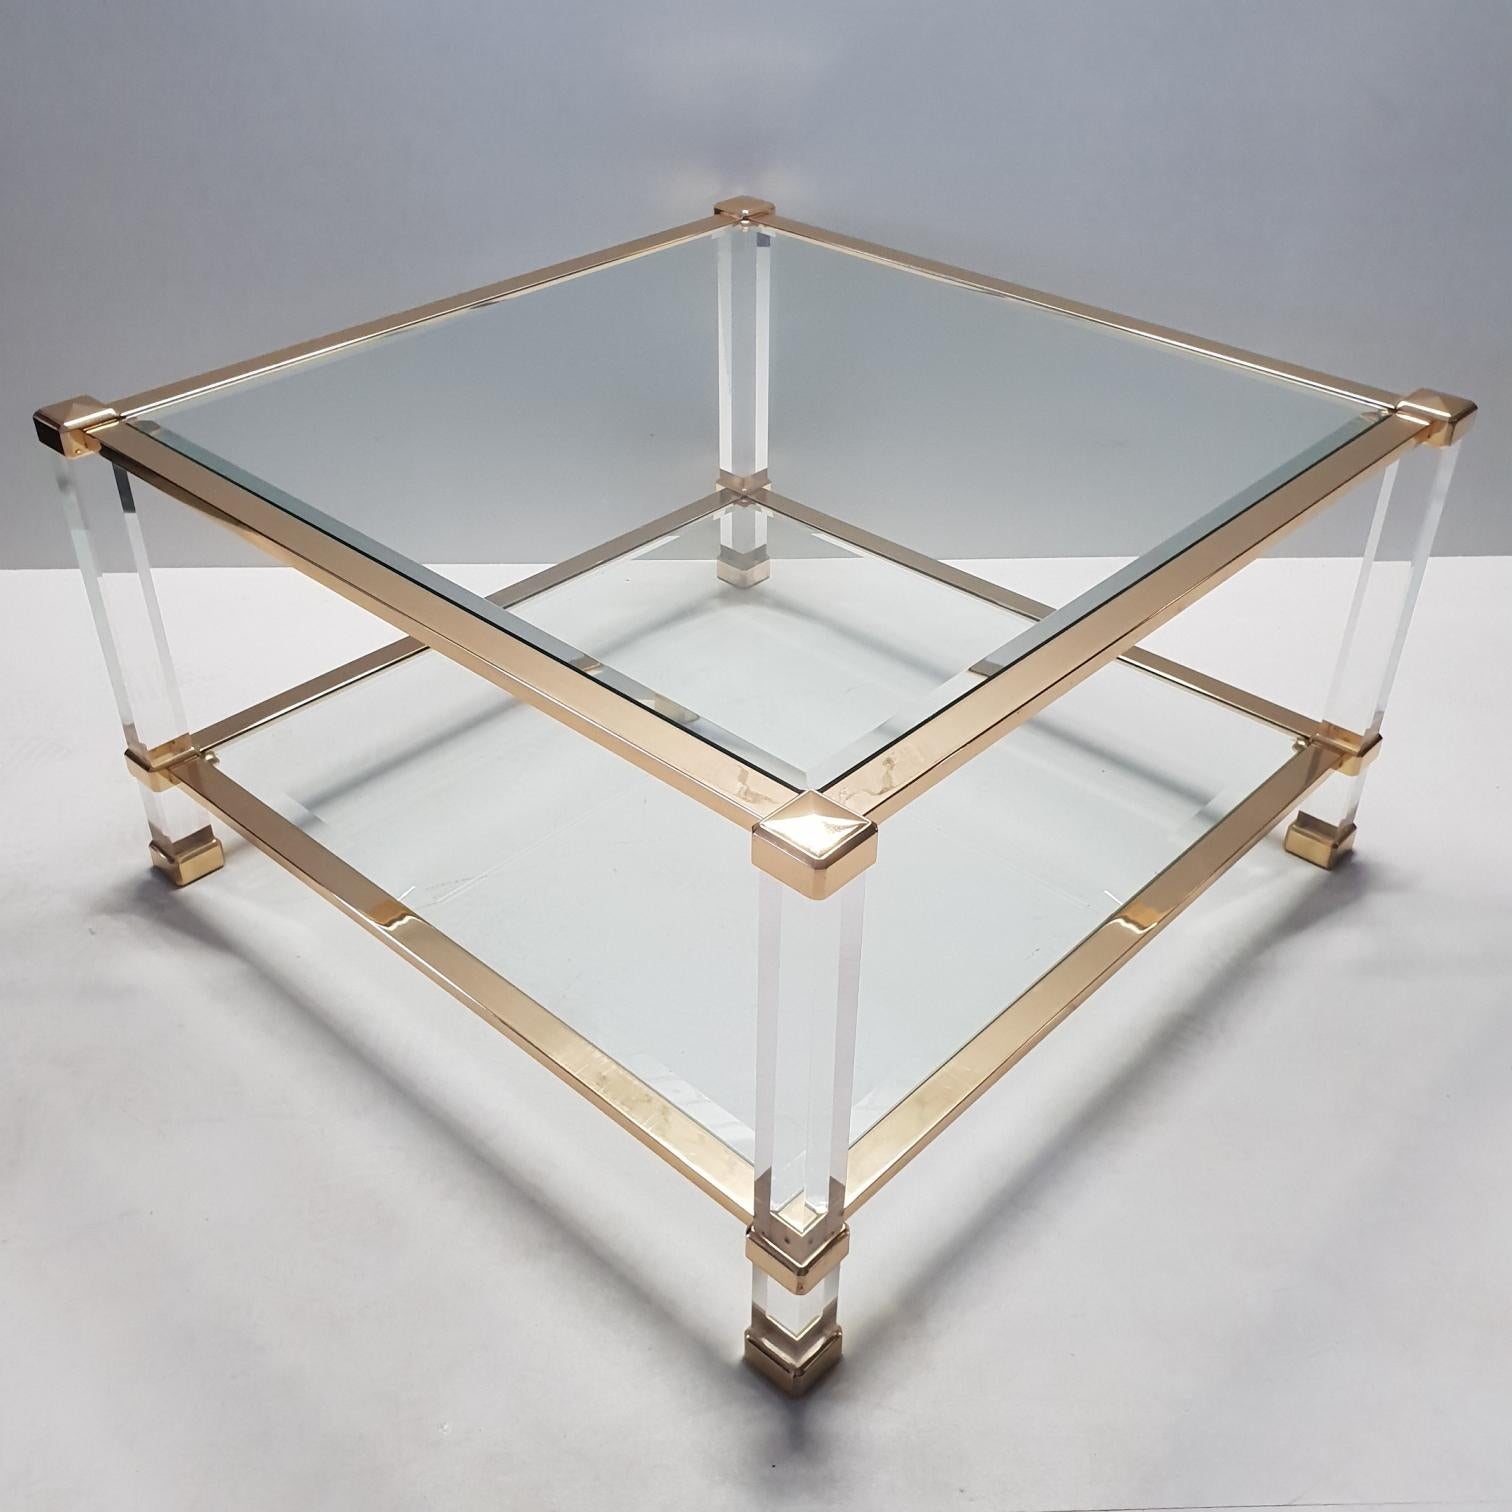 20th Century Italian Lucite and Brass Square Coffee Table by Orsenigo 'Marked', 1970s